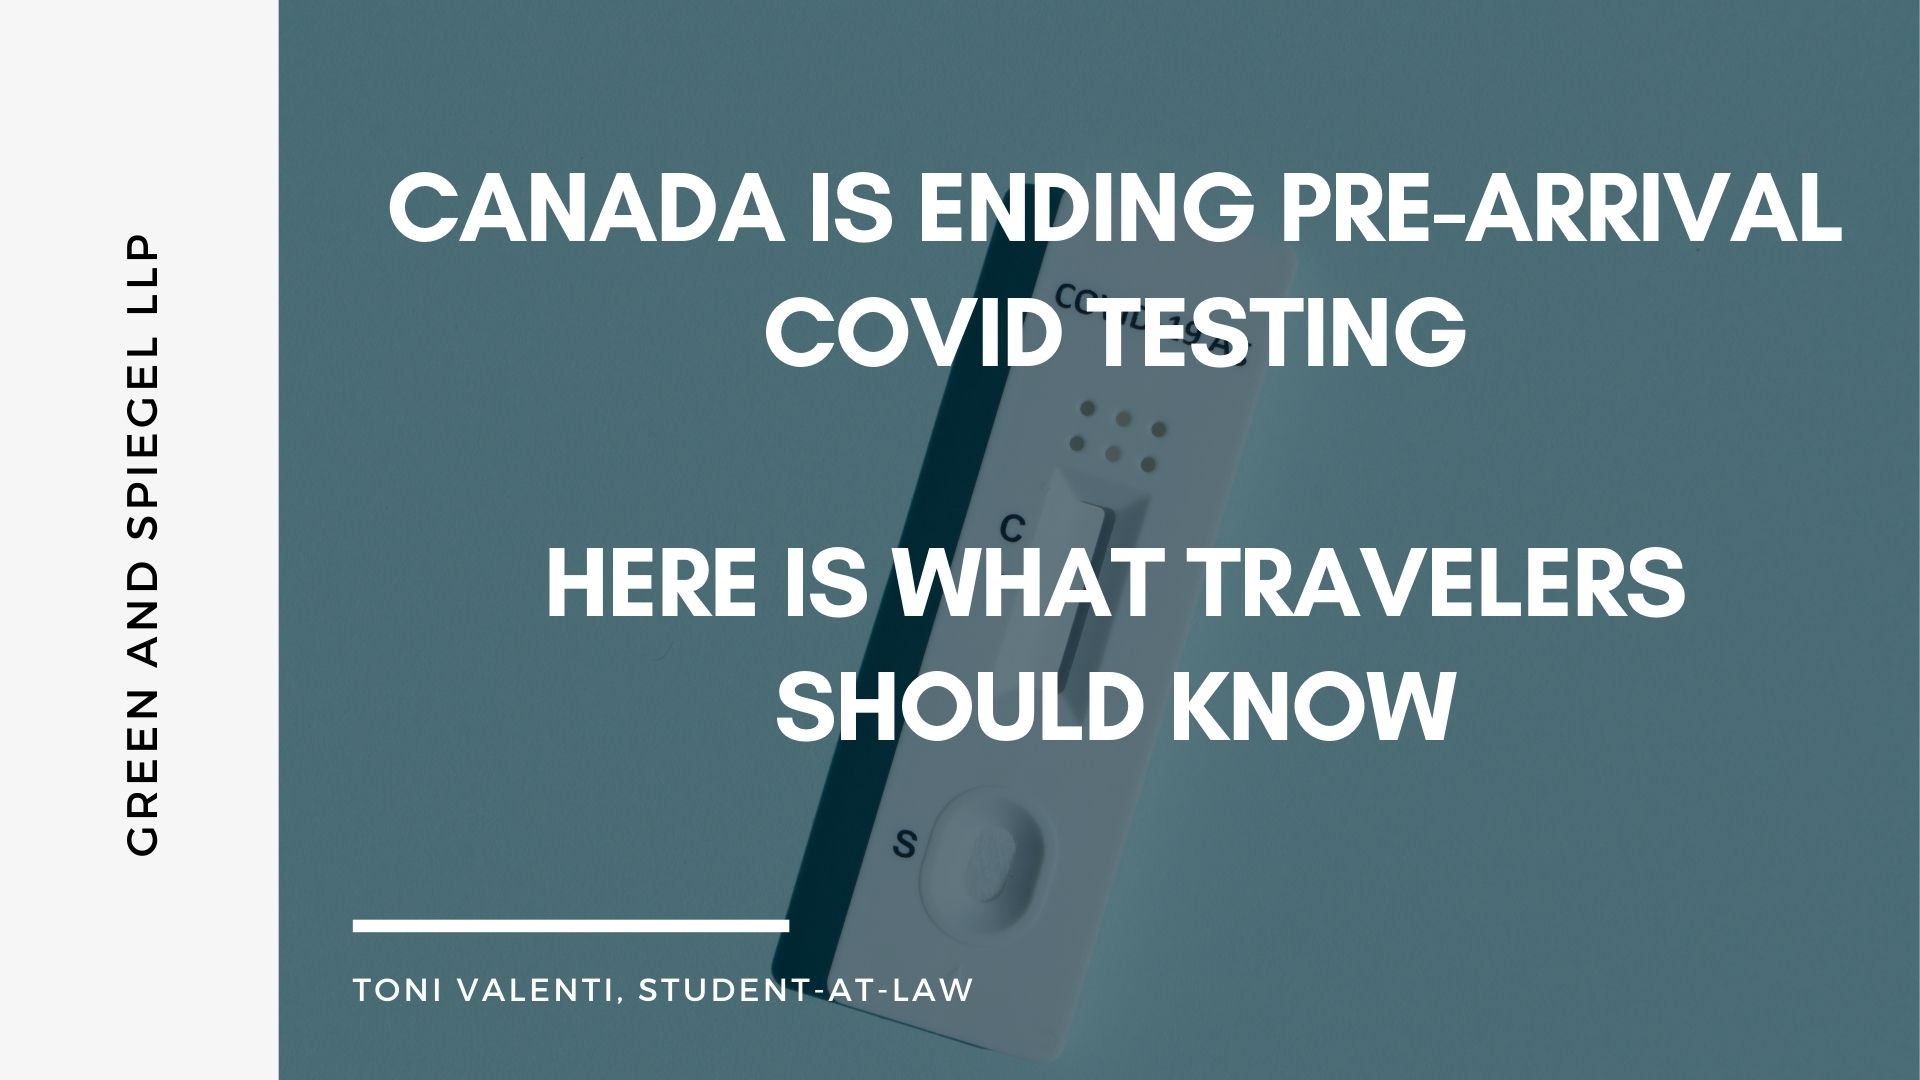 Canada is Ending Pre-Arrival COVID Testing